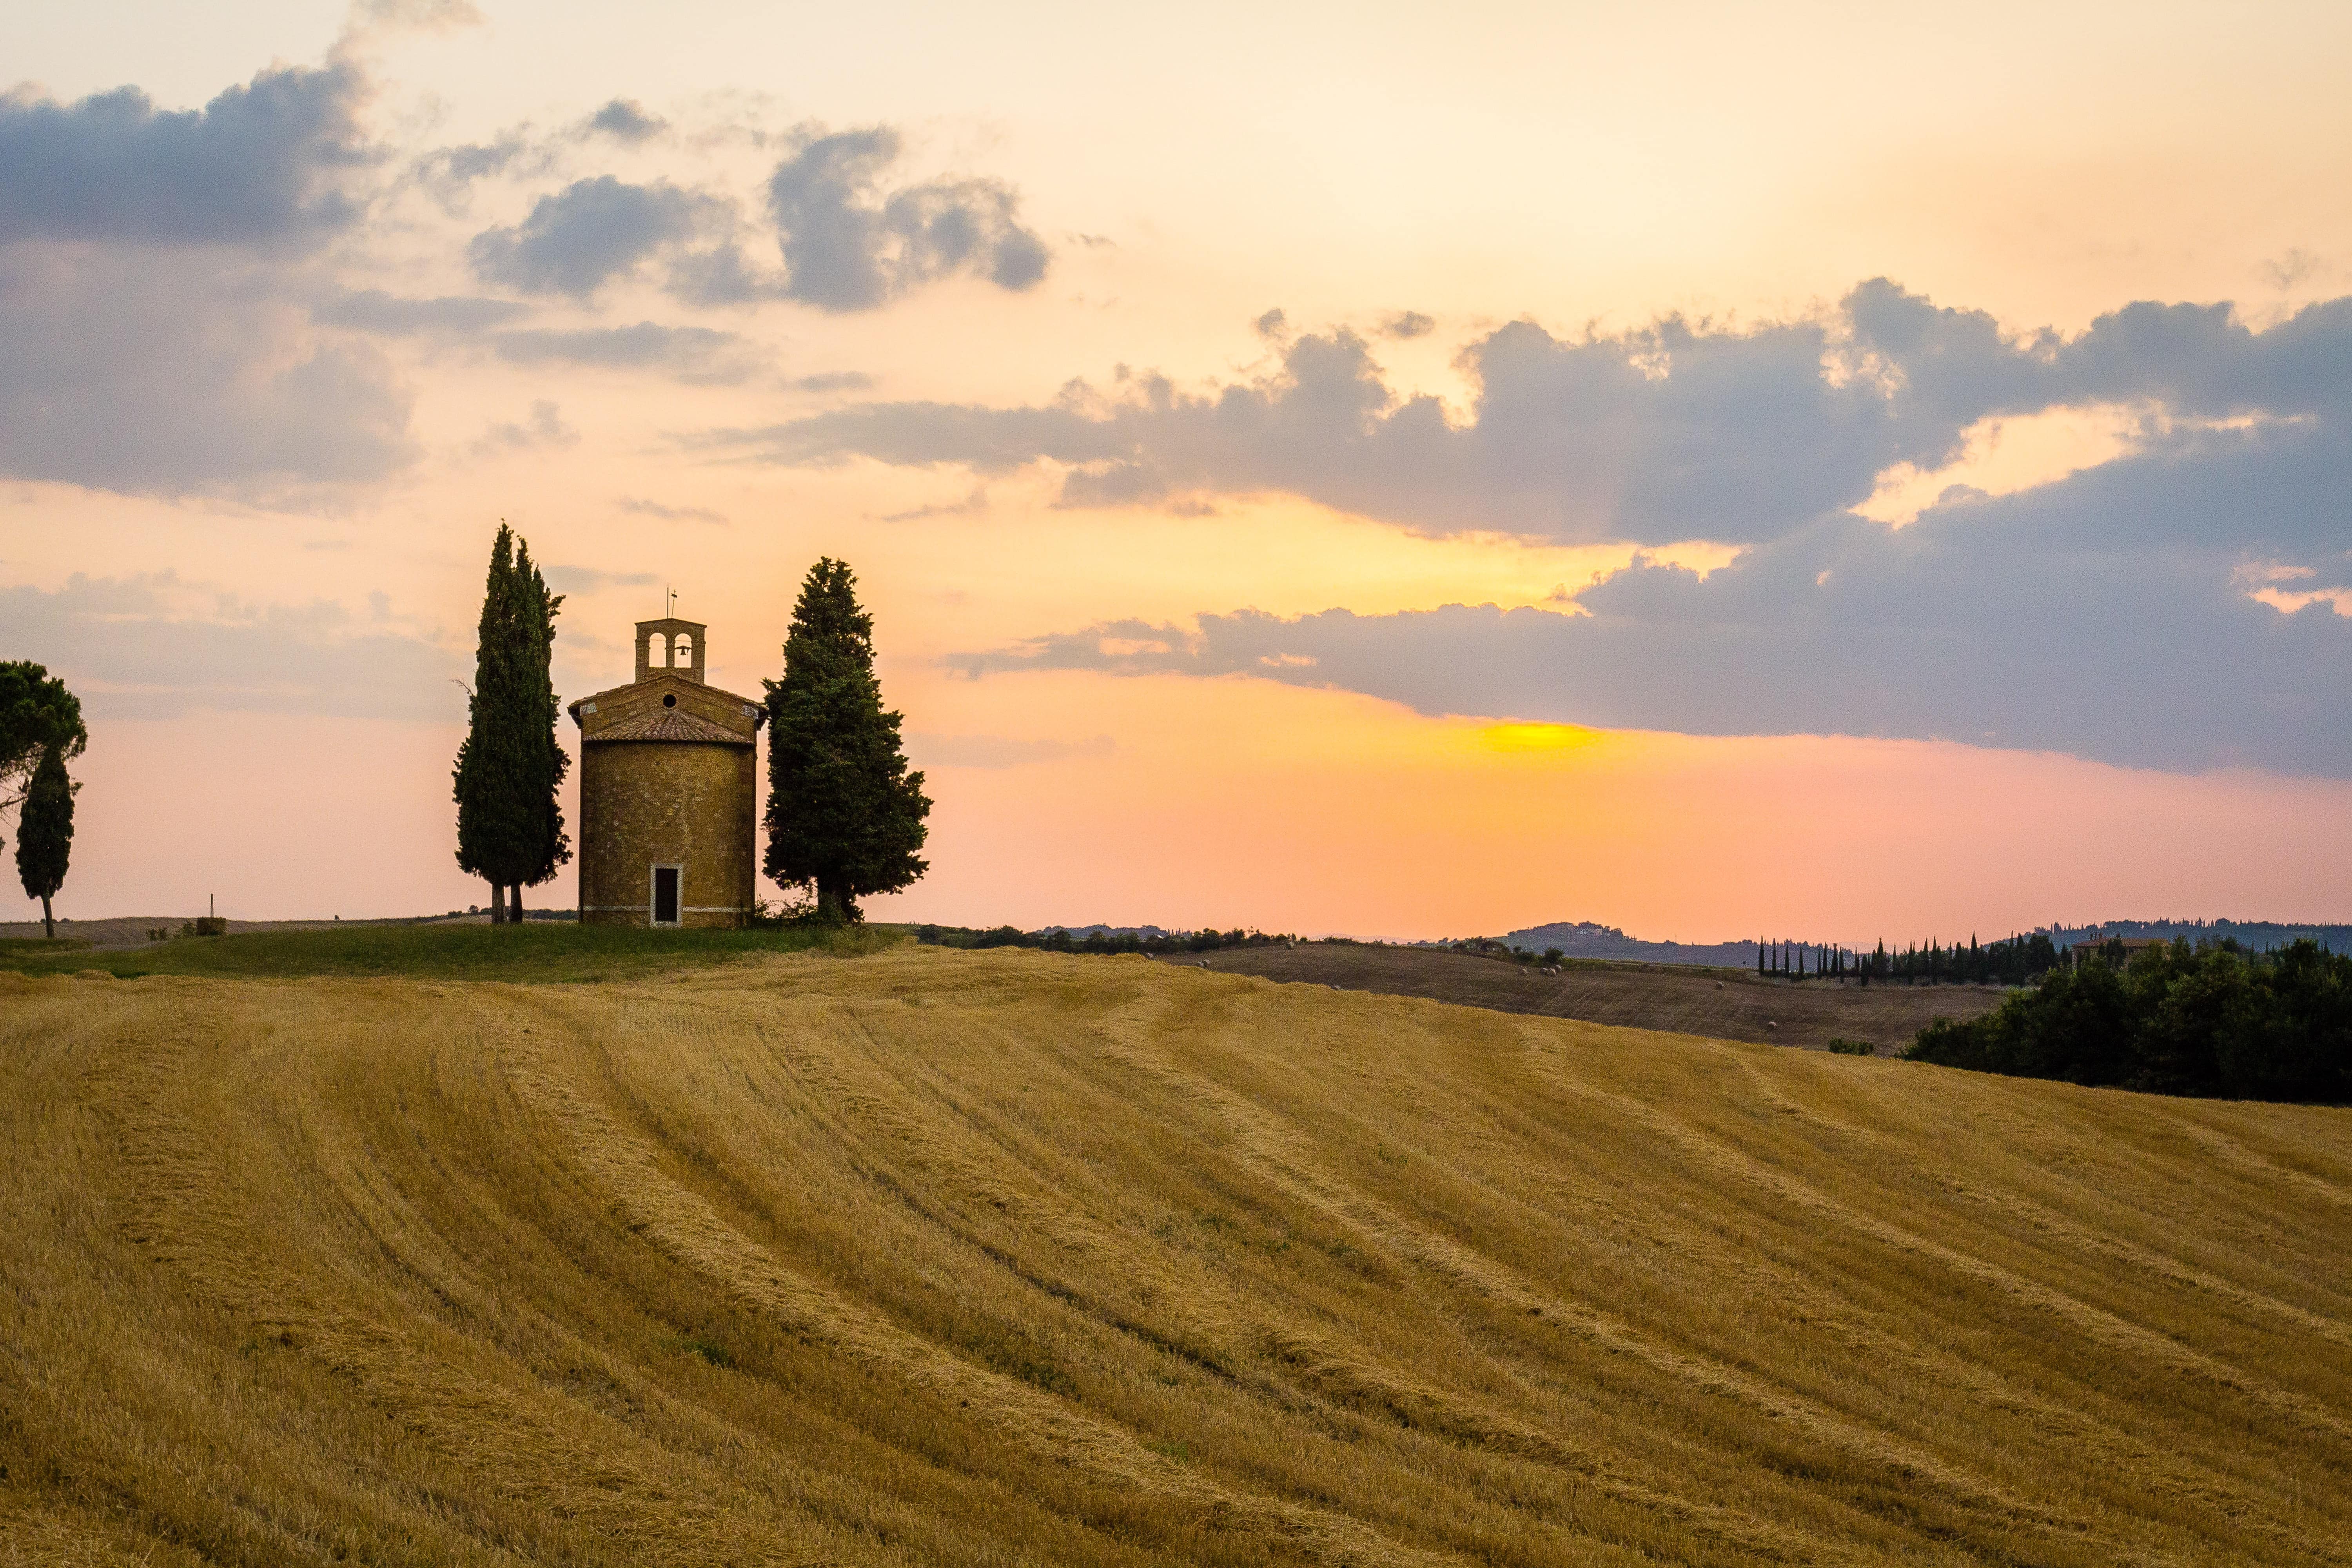 Stock image - Trees on a hill at sunset / sunrise - Val d'Orcia, Pienza, Tuscany, Italy - Photo by Simon Rae on Unsplash